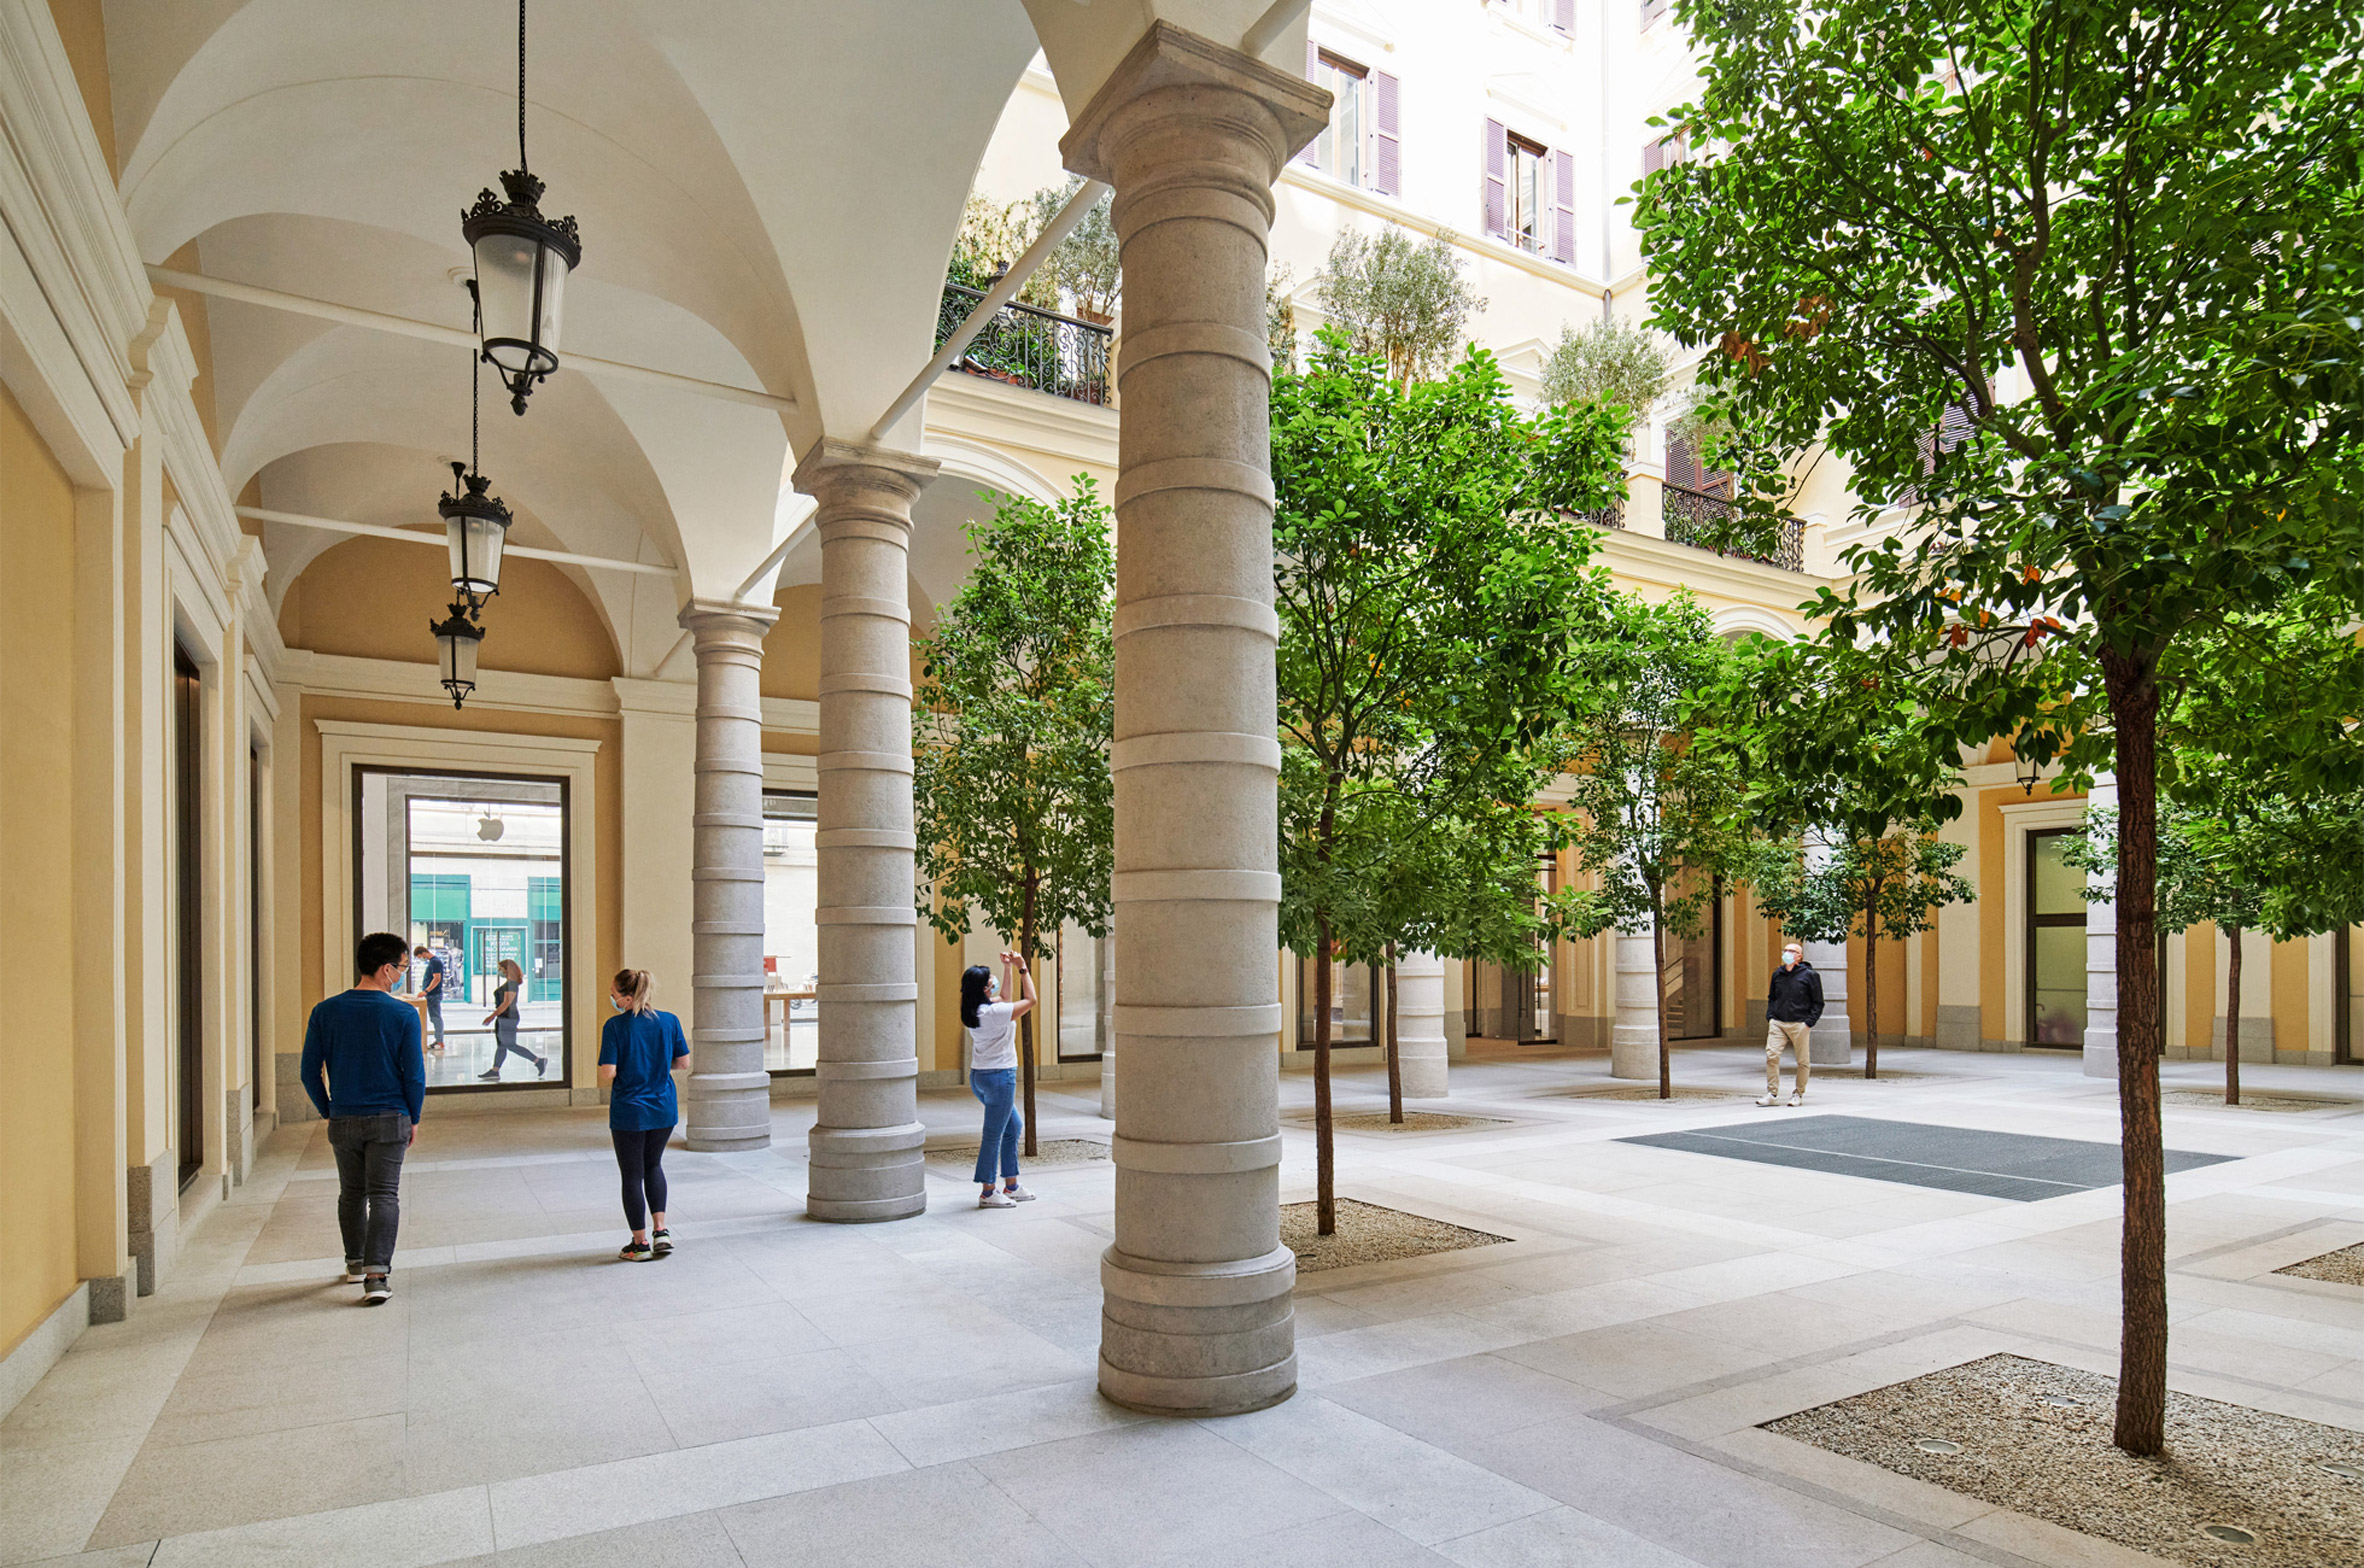 The courtyard of the Apple Via del Corso contains local trees